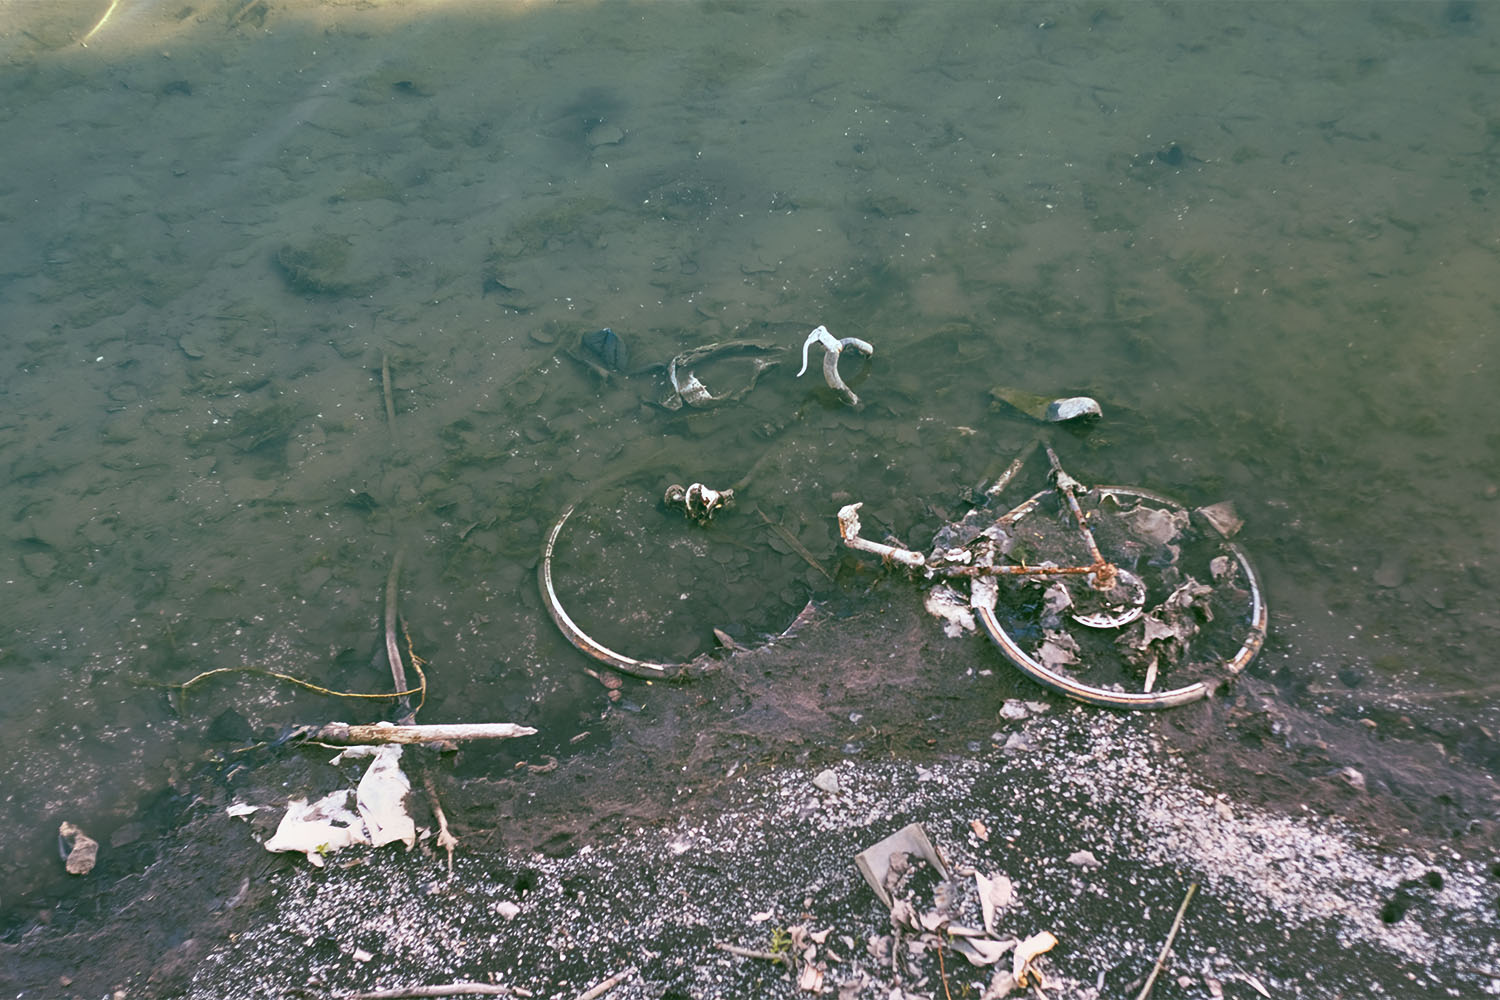 An old bicycle disintegrating in the canal.